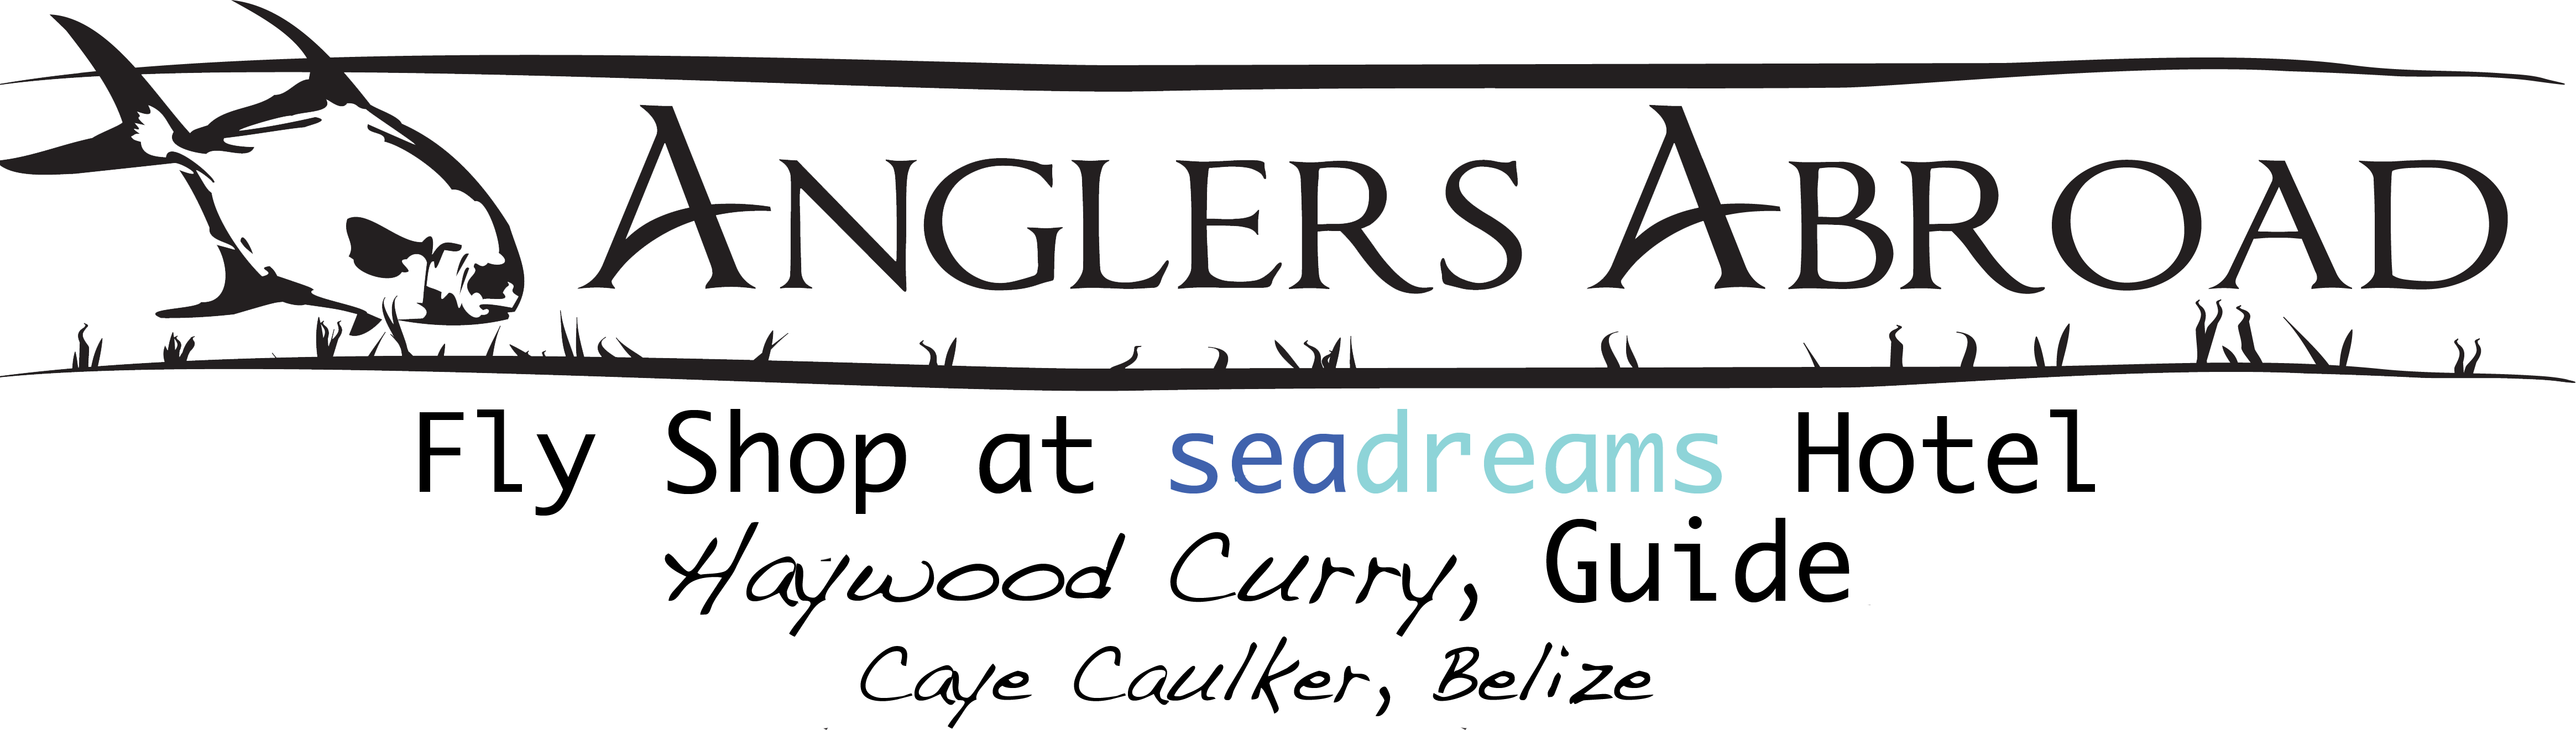 Anglers Abroad